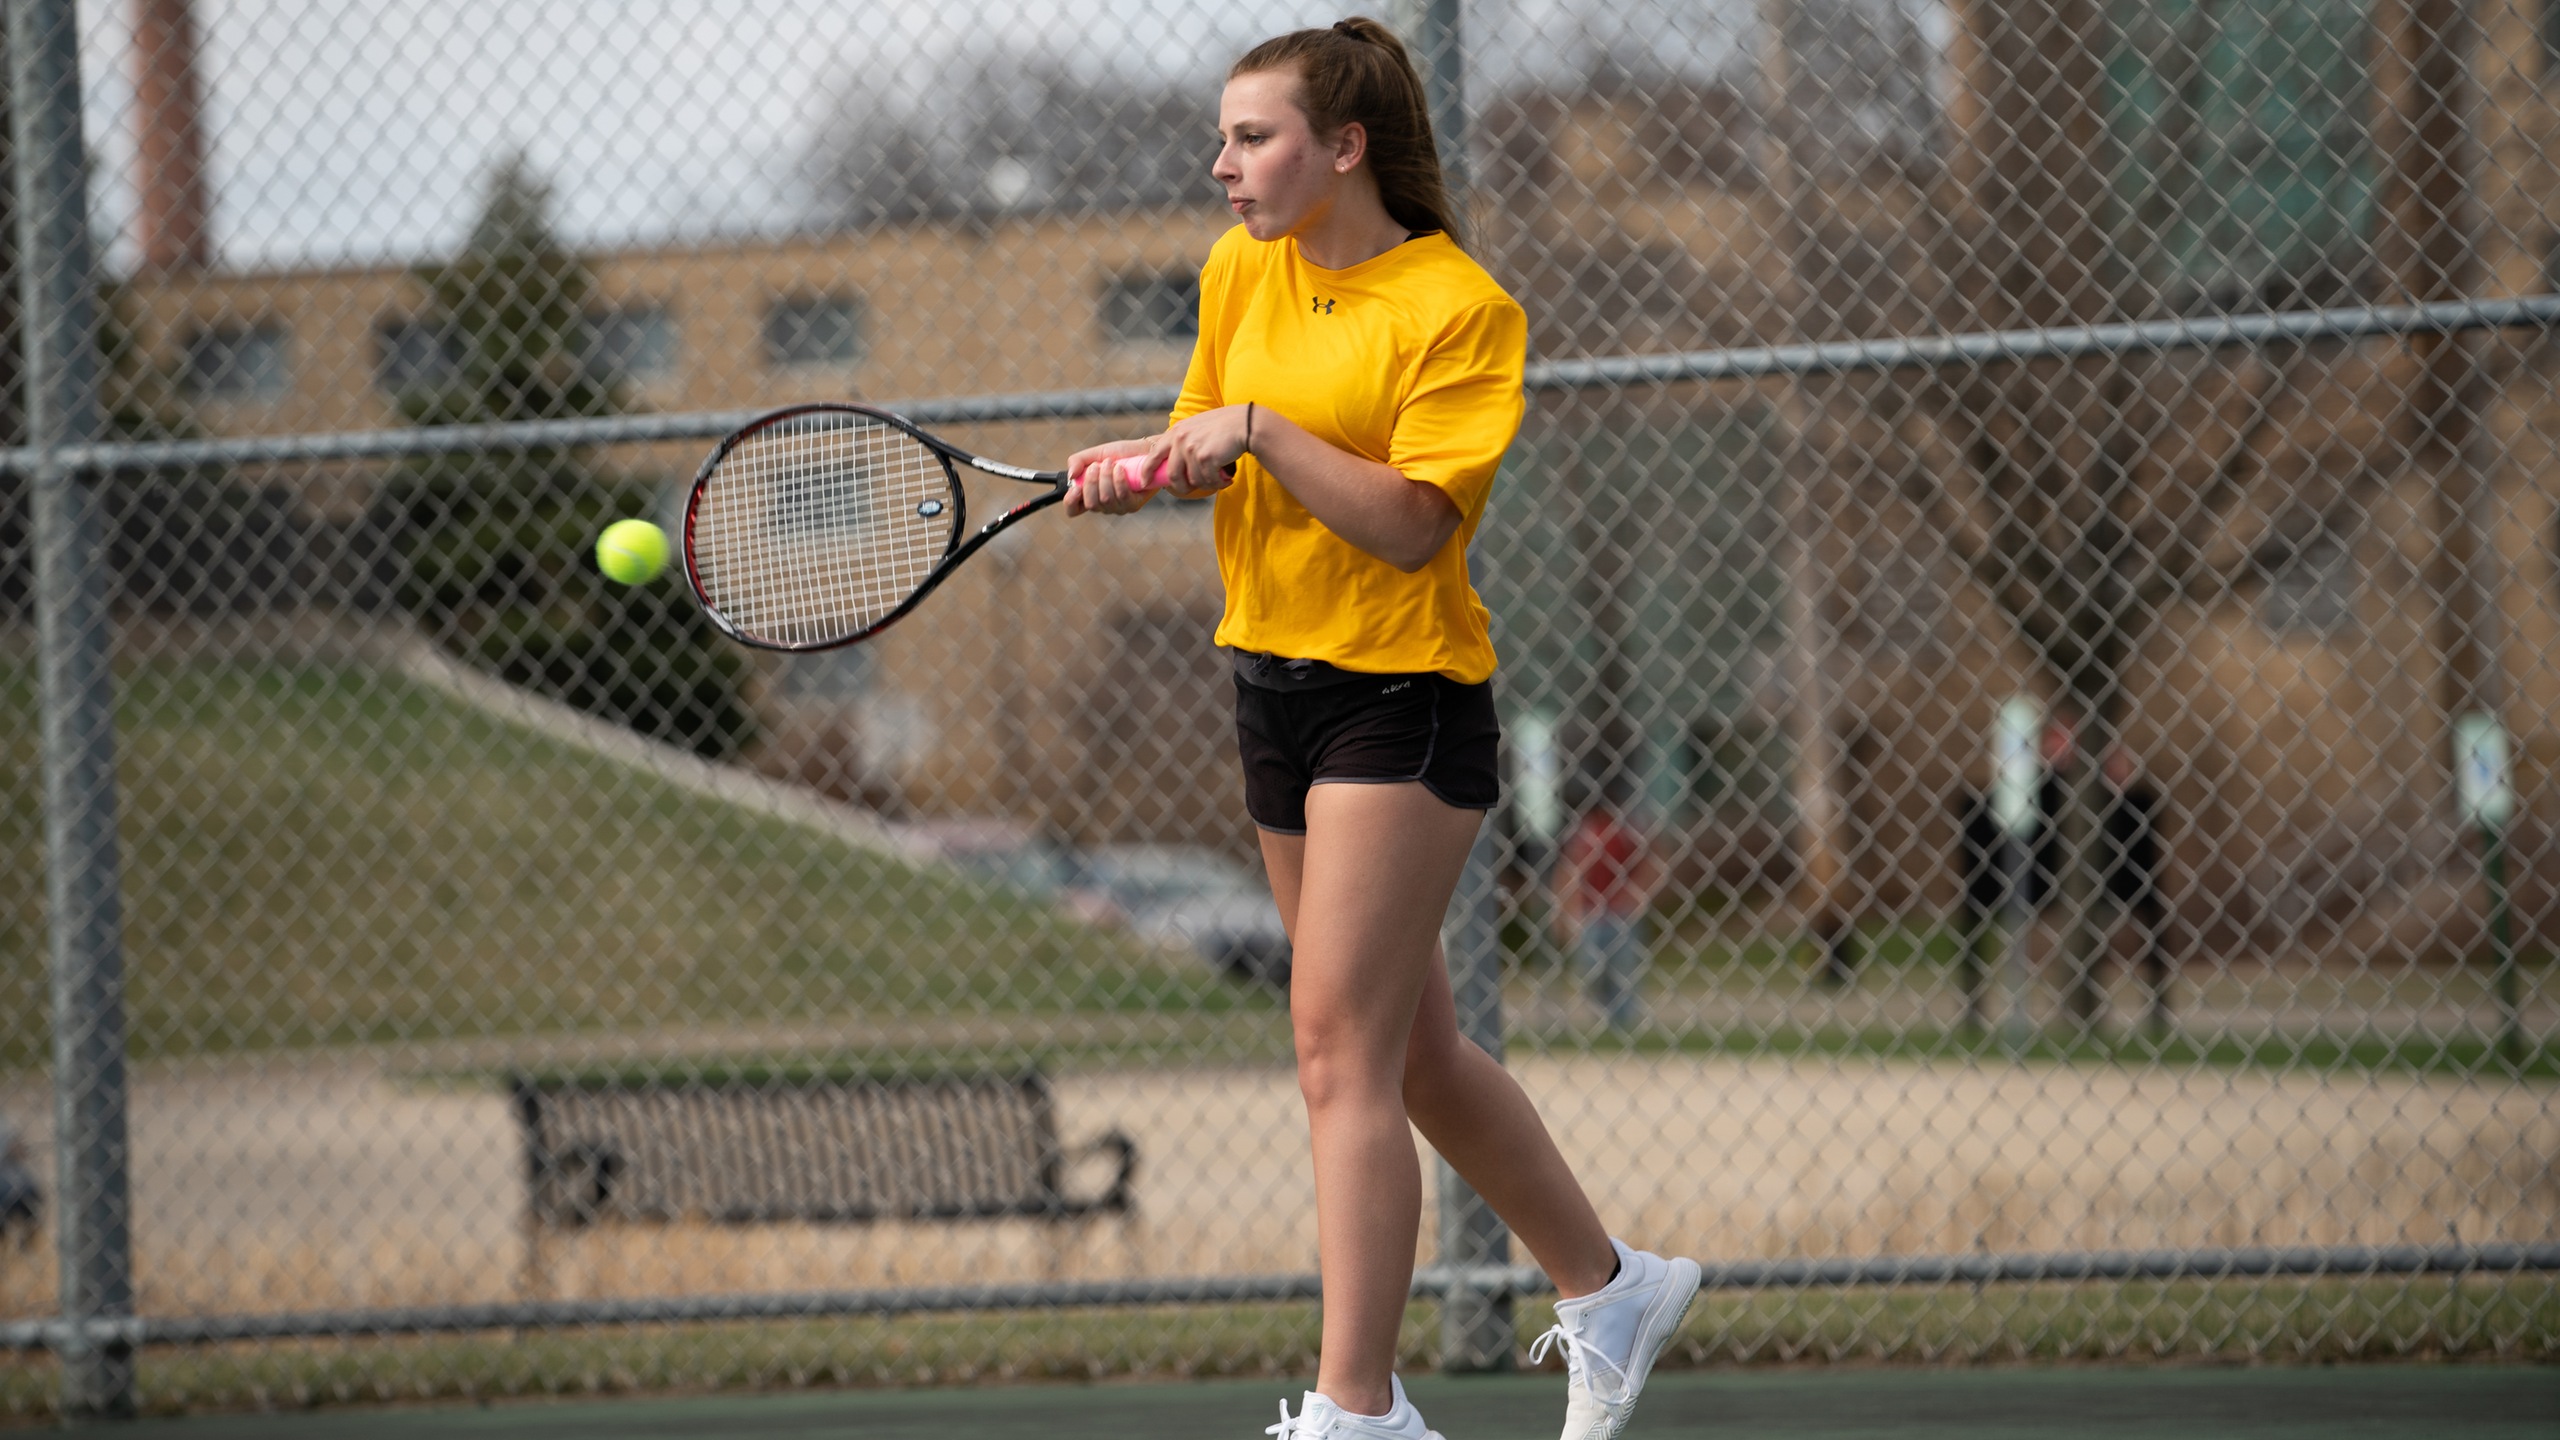 Maddie Toboyek earned wins for the Titans at No. 2 singles and No. 1 doubles against UW-Stout.